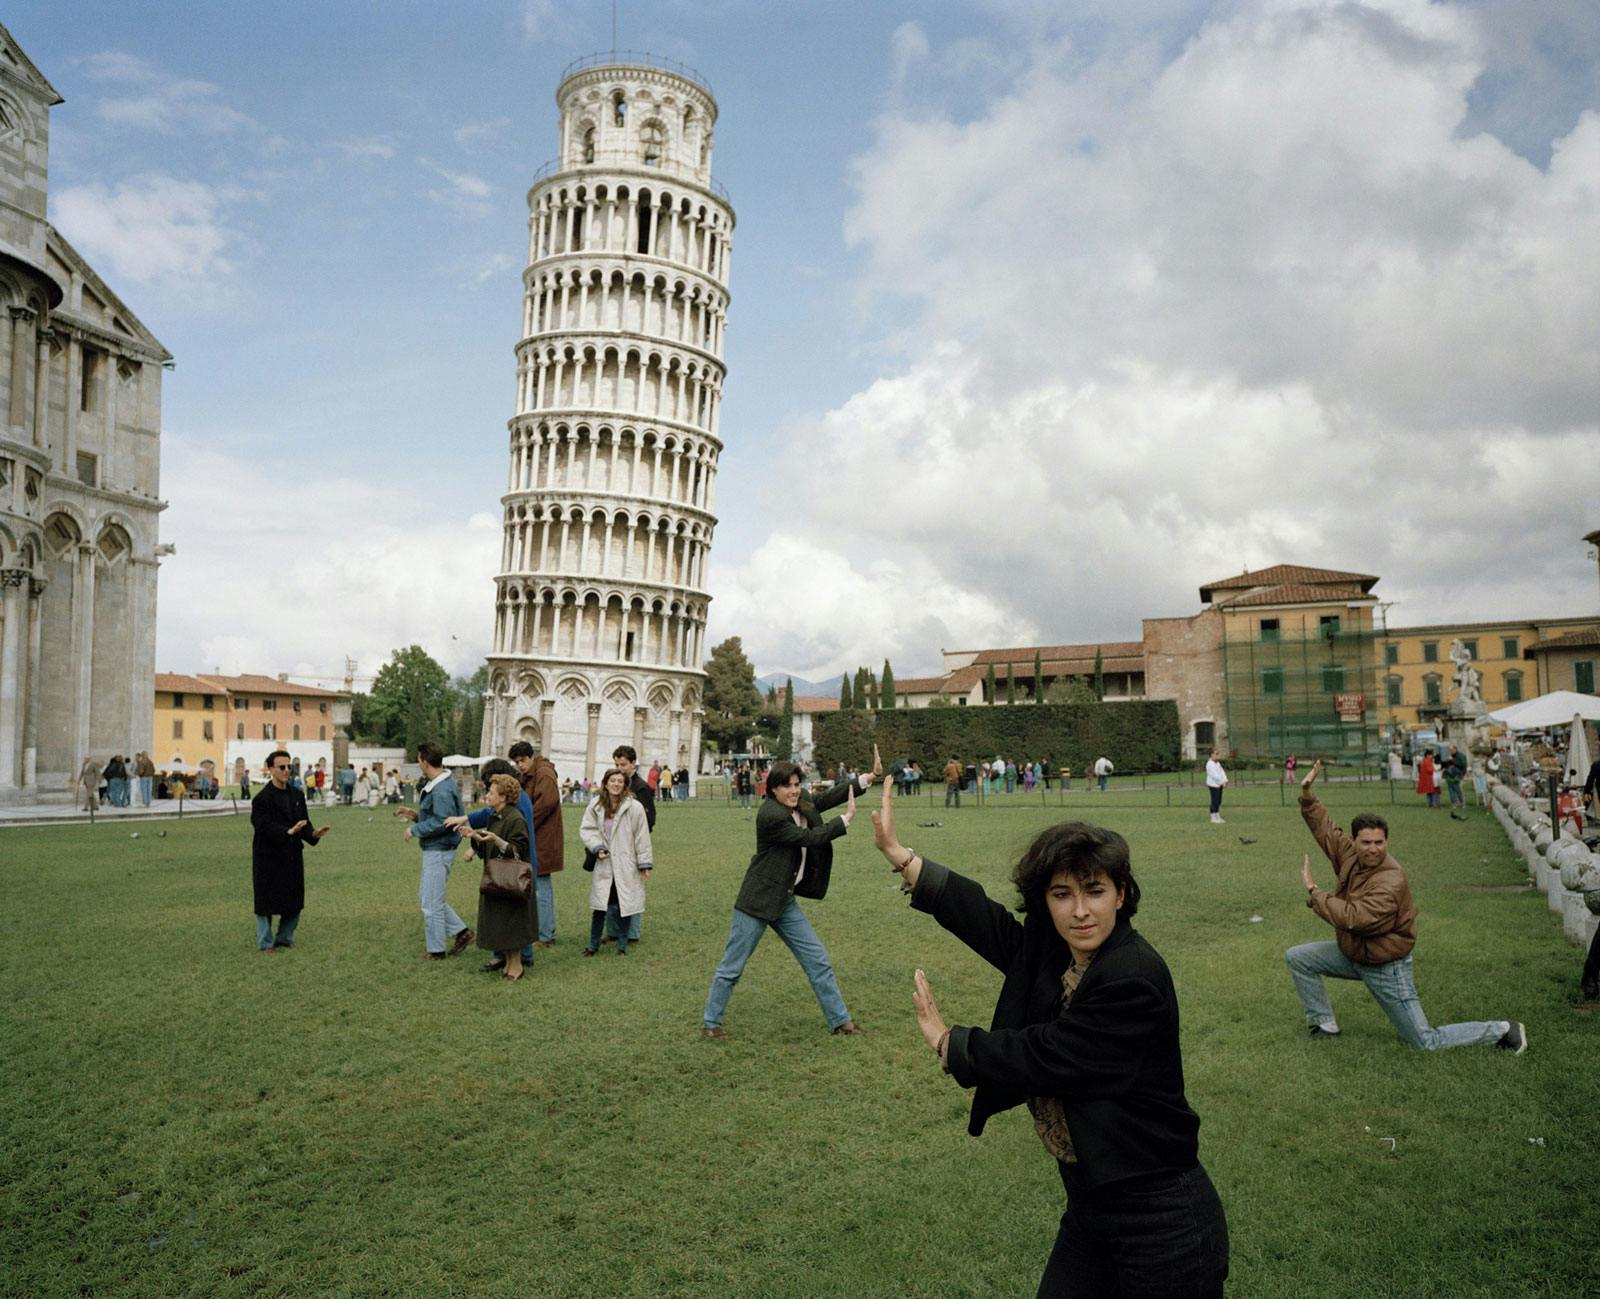 The leaning Tower of Pisa